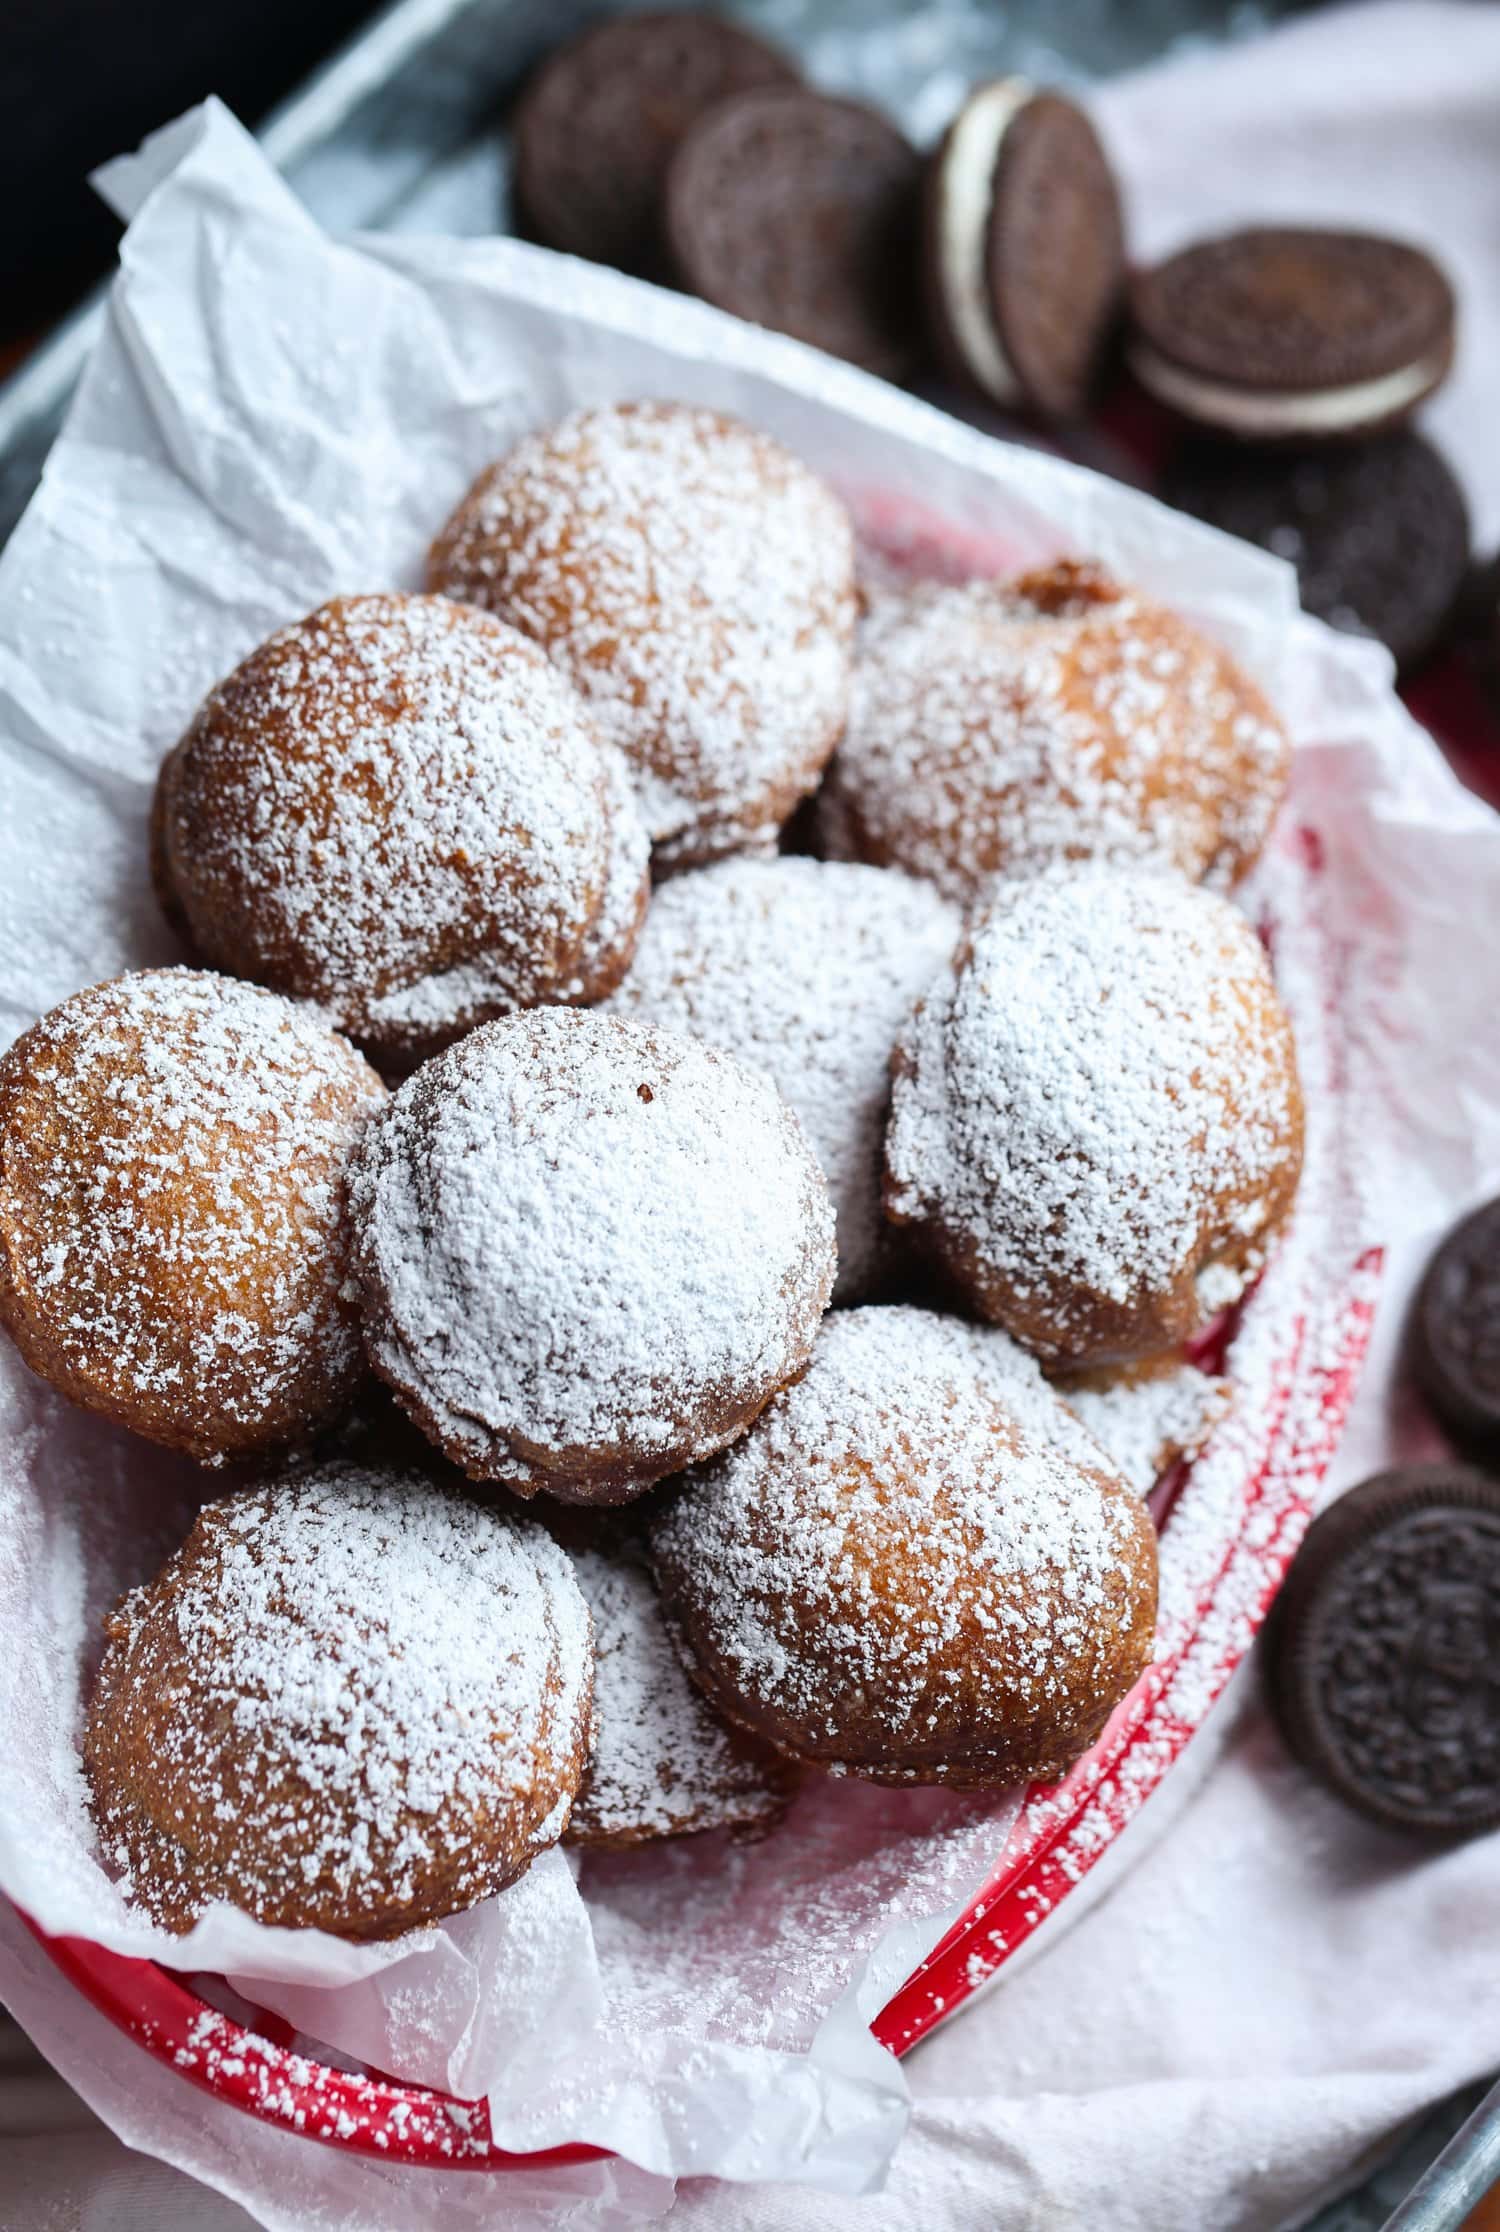 powdered sugar sprinkled on top of batter fried Oreos